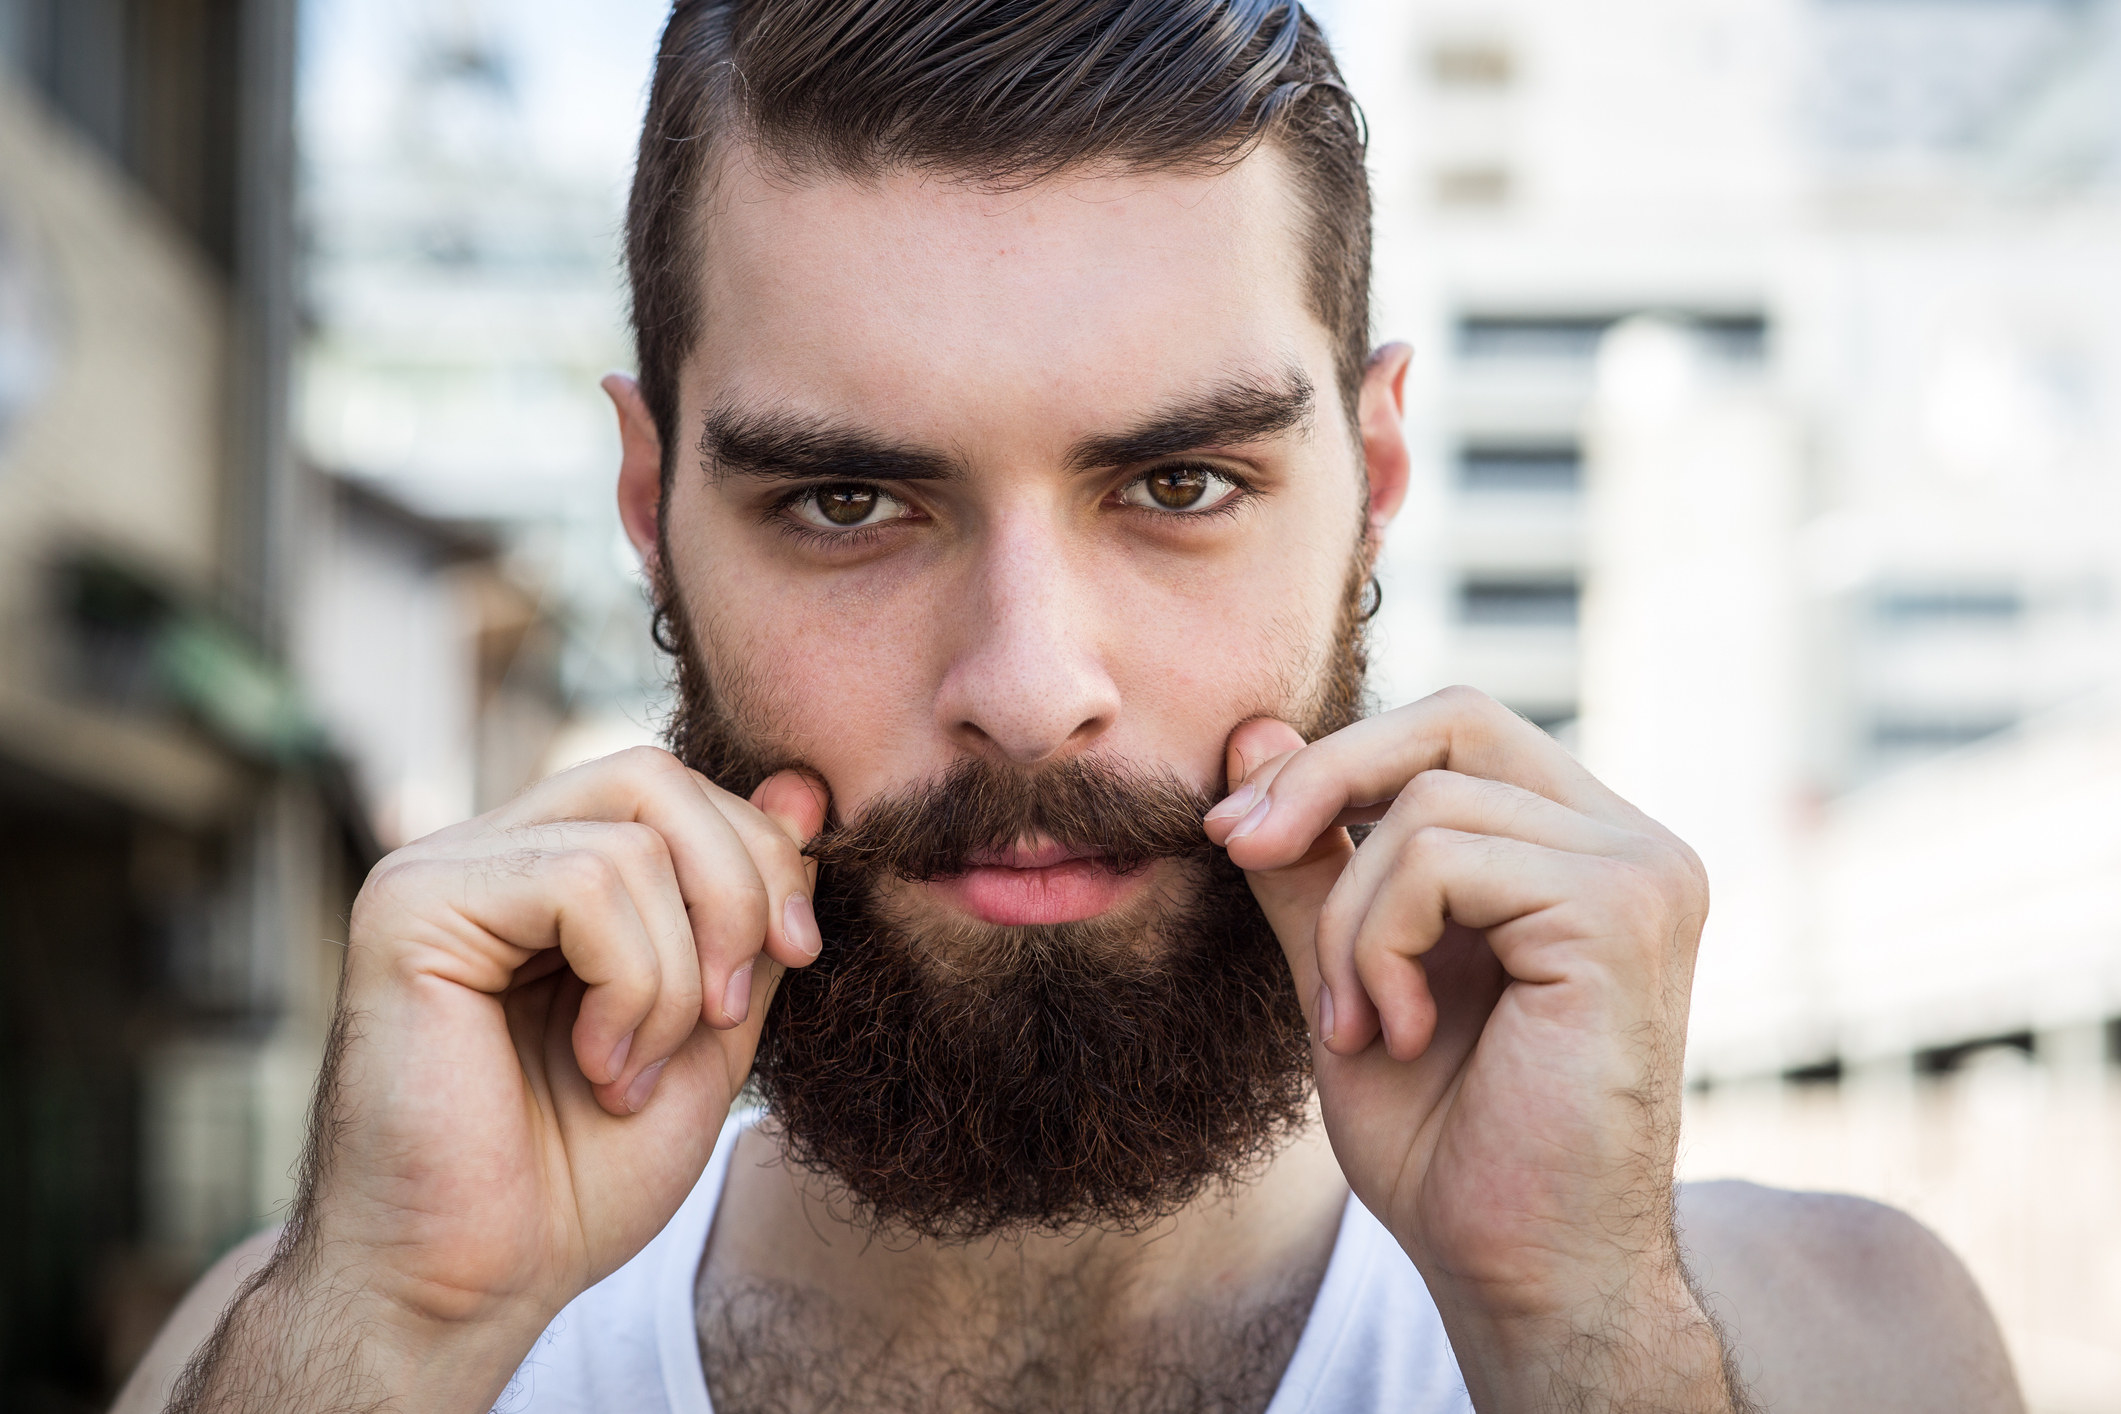 A bearded hipster twists the ends of his mustache while looking into the camera